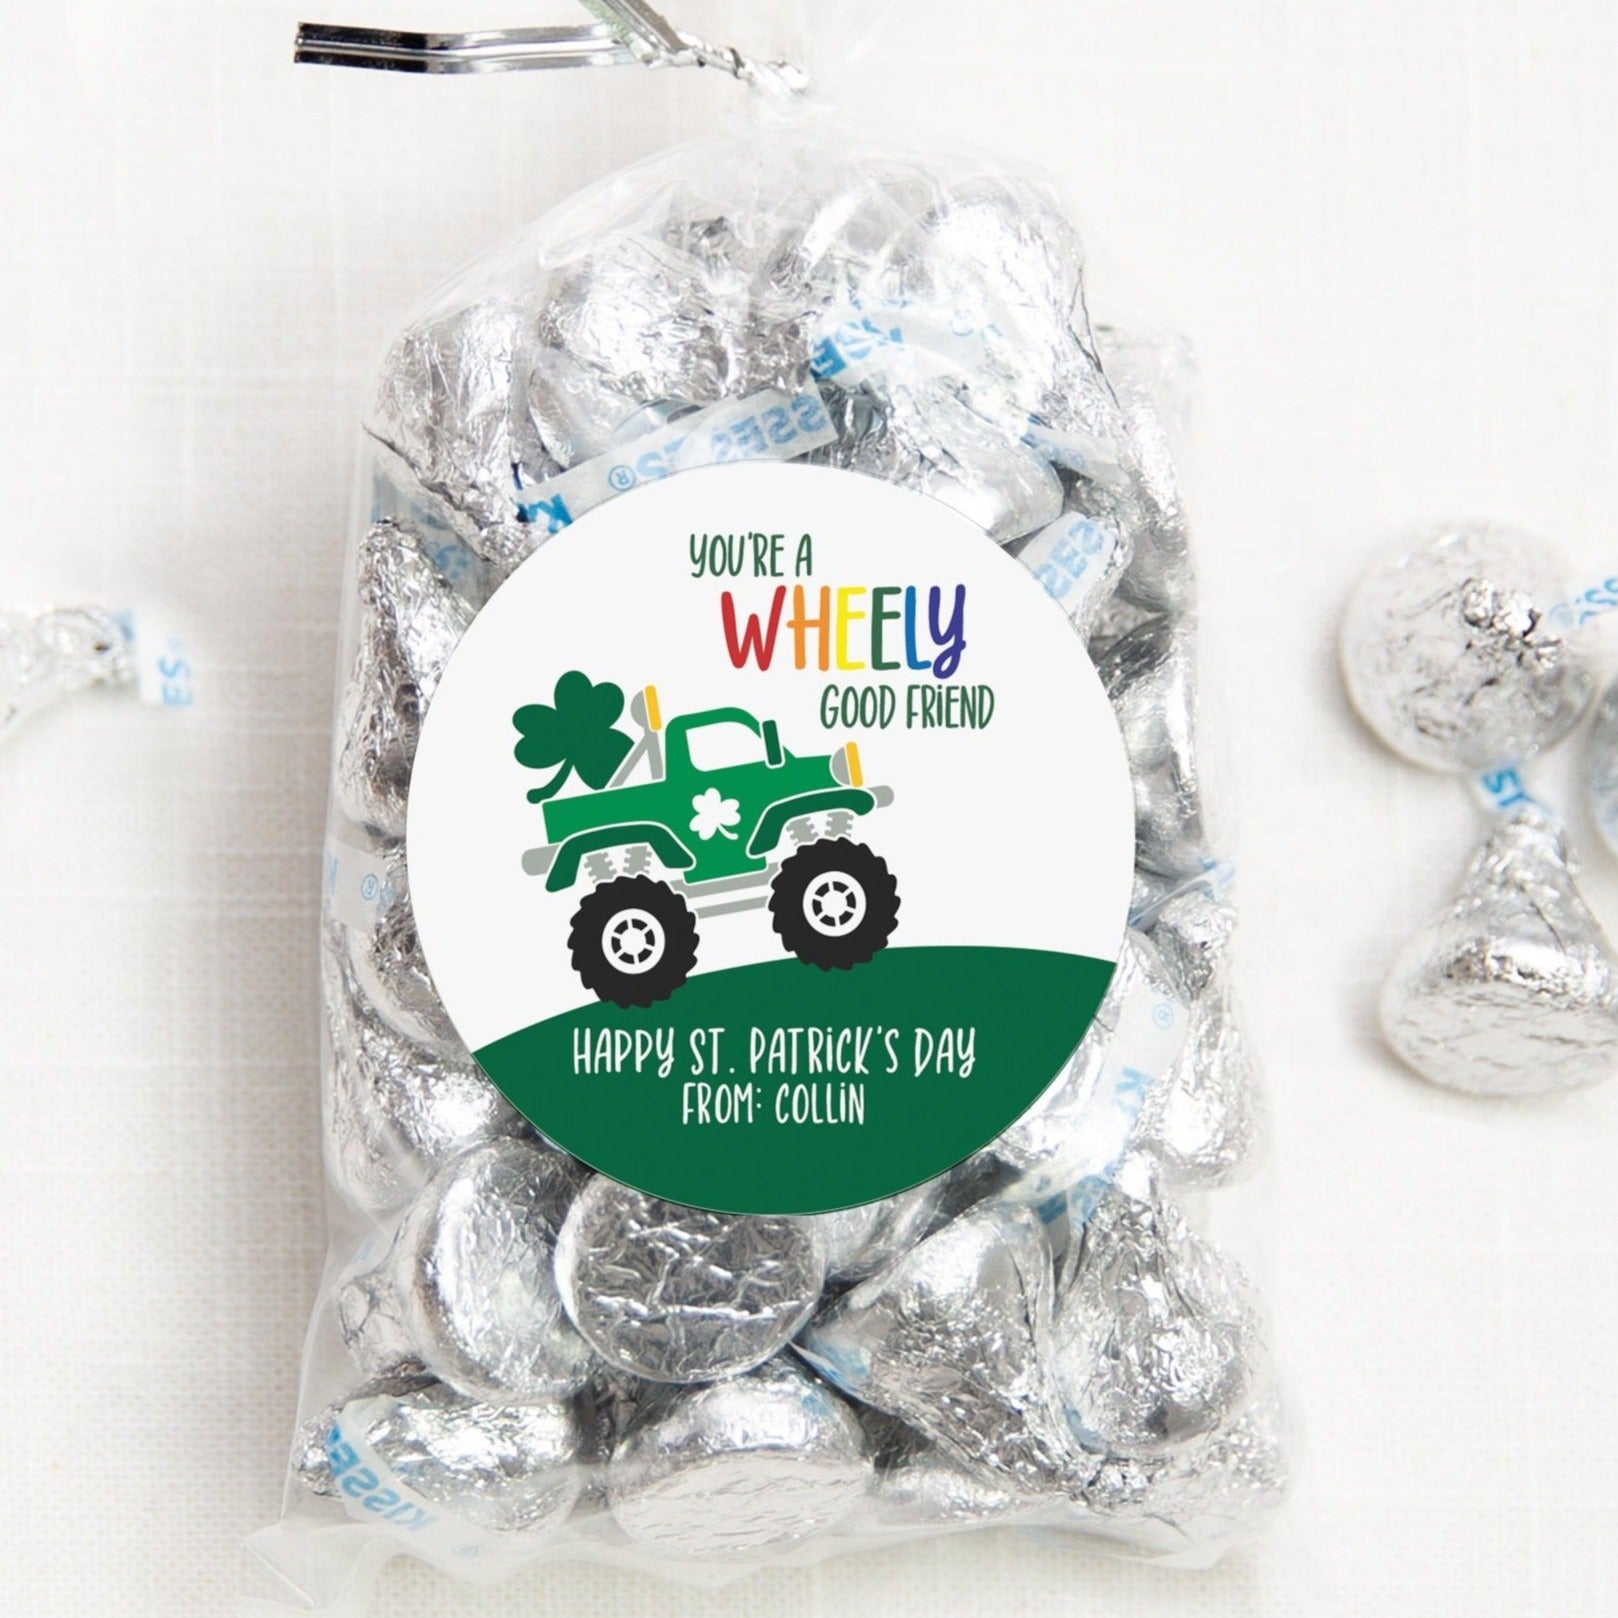 Monster Truck "you're a wheely good friend" Personalized Happy St. Patrick's Day class treat bag sticker, round matte stickers, 2.5", Pipsy.com